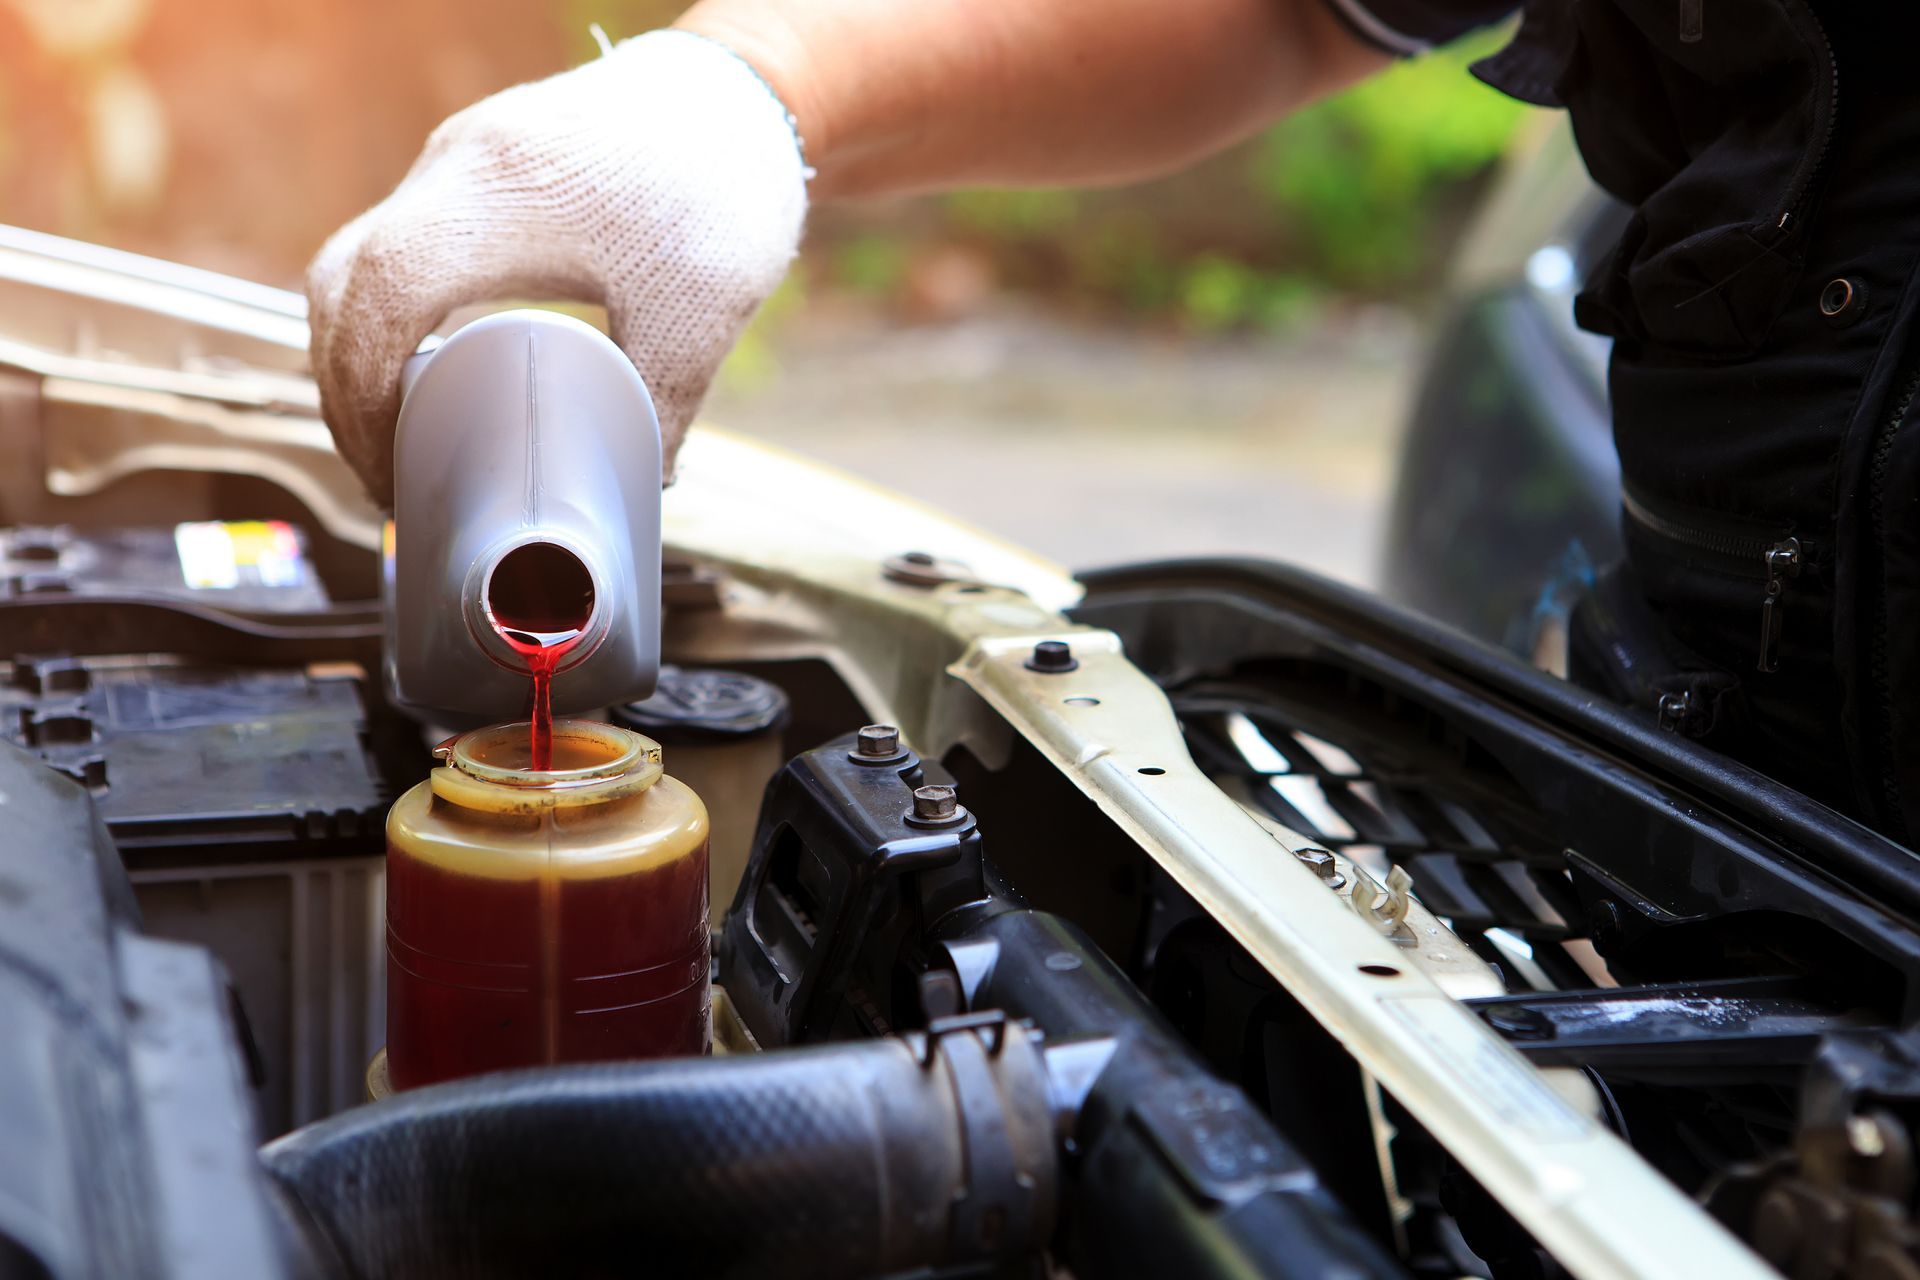 A person is pouring fluid into a car reservoir.